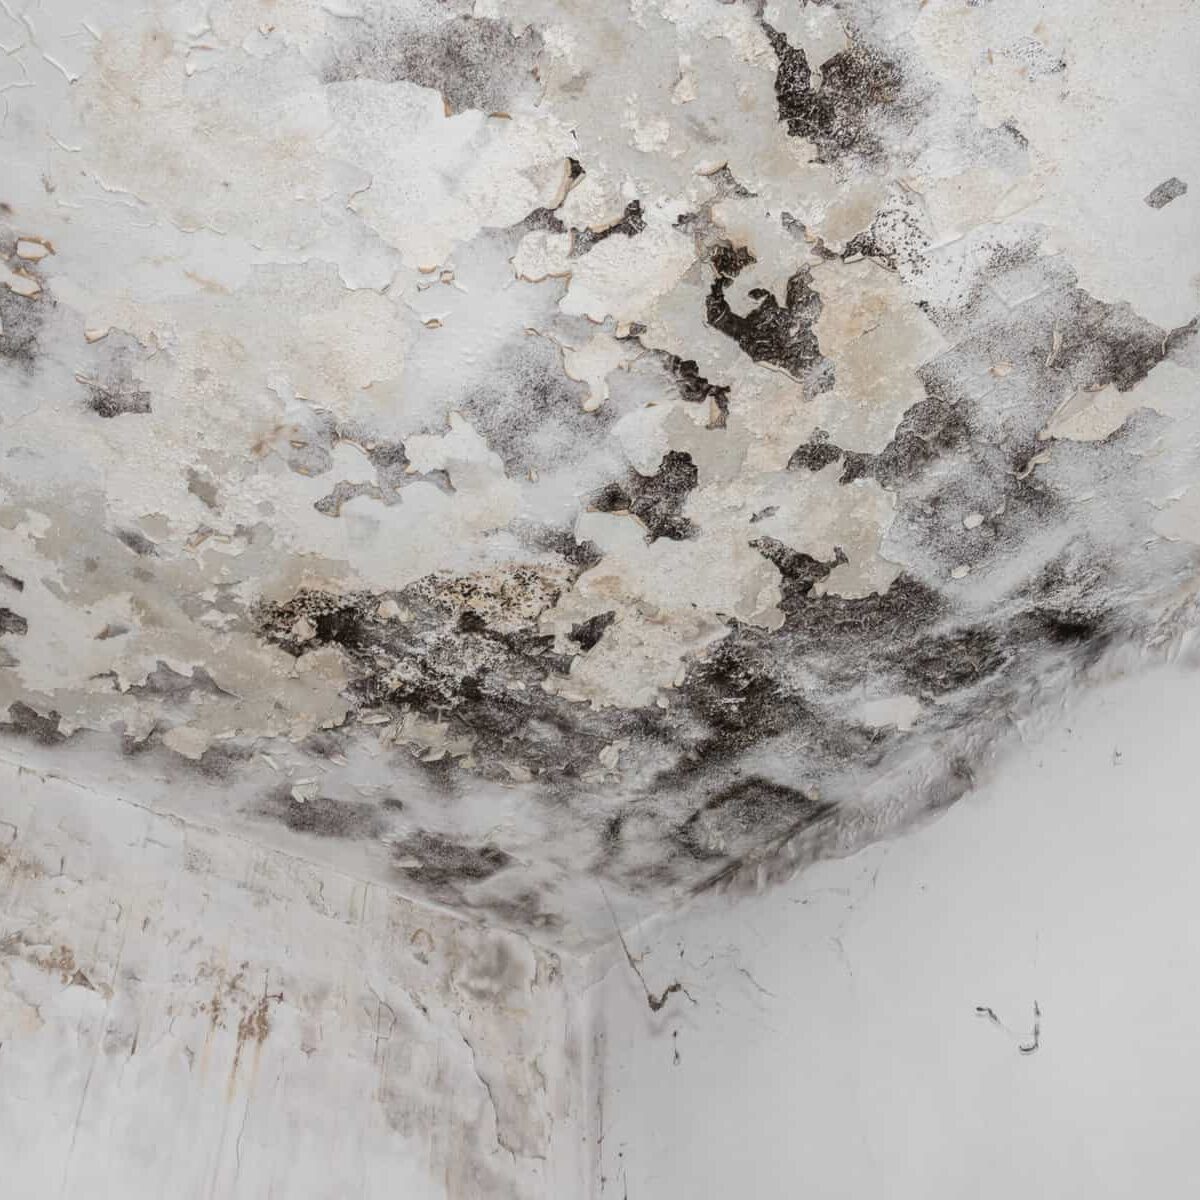 Moss and Mold spots on the ceiling on wall due to poor air ventilation and high humidity. Harm to health.